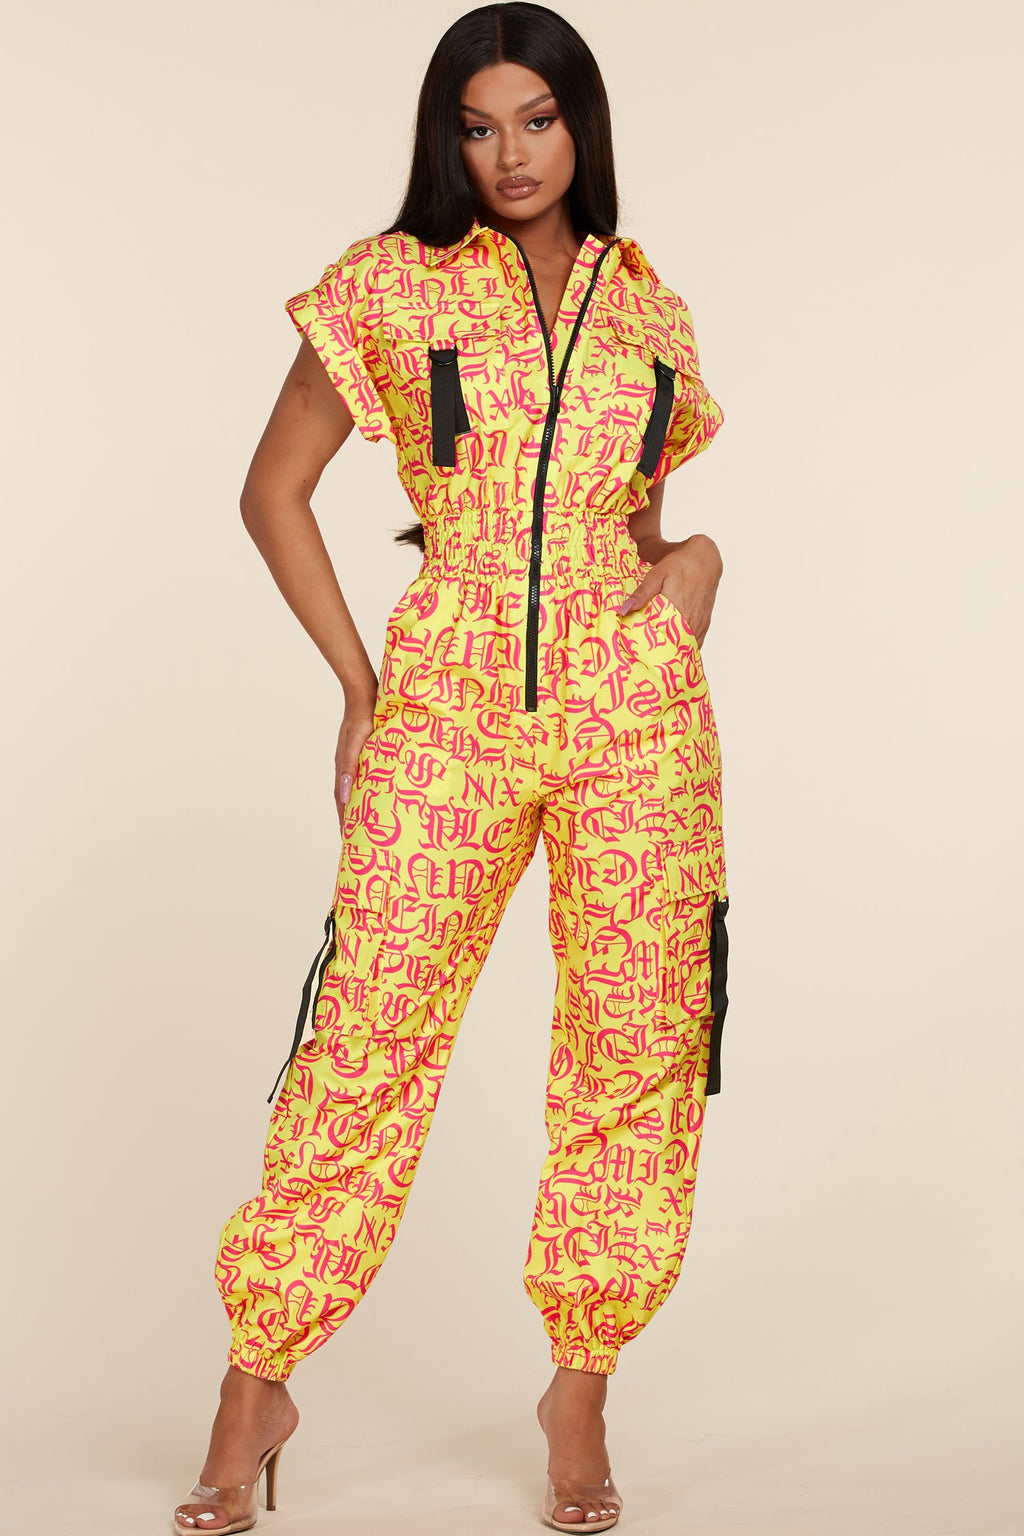 YELLOW JUMPSUIT WITH HOTPINK LETTERS - PRIVILEGE 